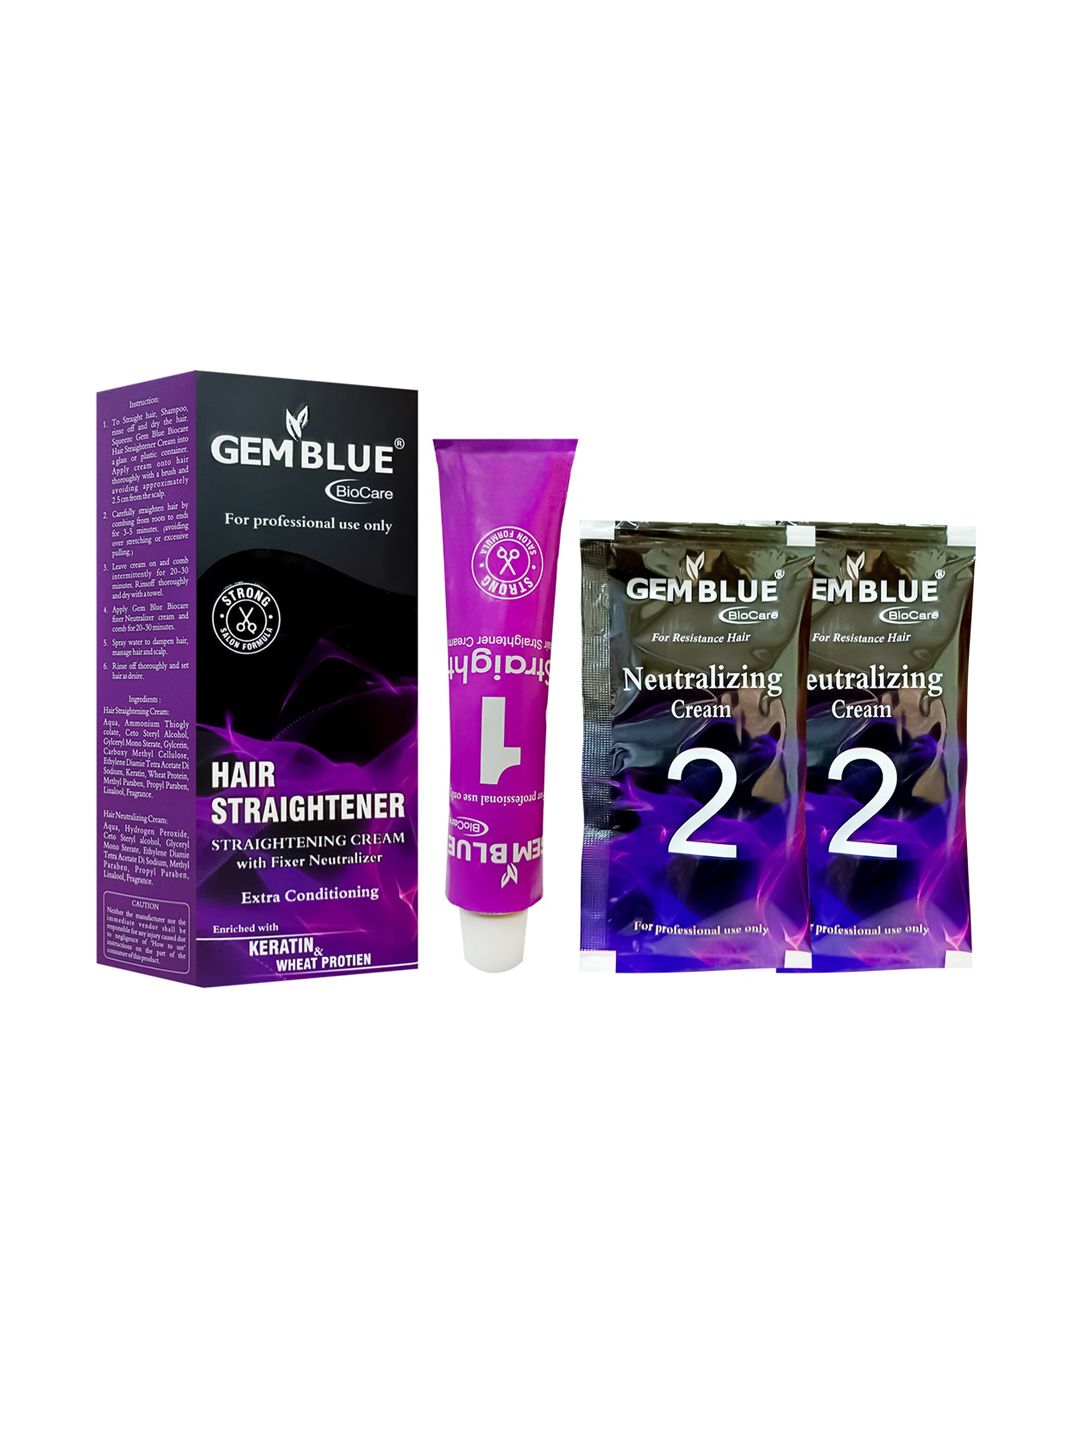 GEMBLUE BioCare Extra Conditioning Hair Straightener Cream With Fixer Neutralizer - 60 g Price in India